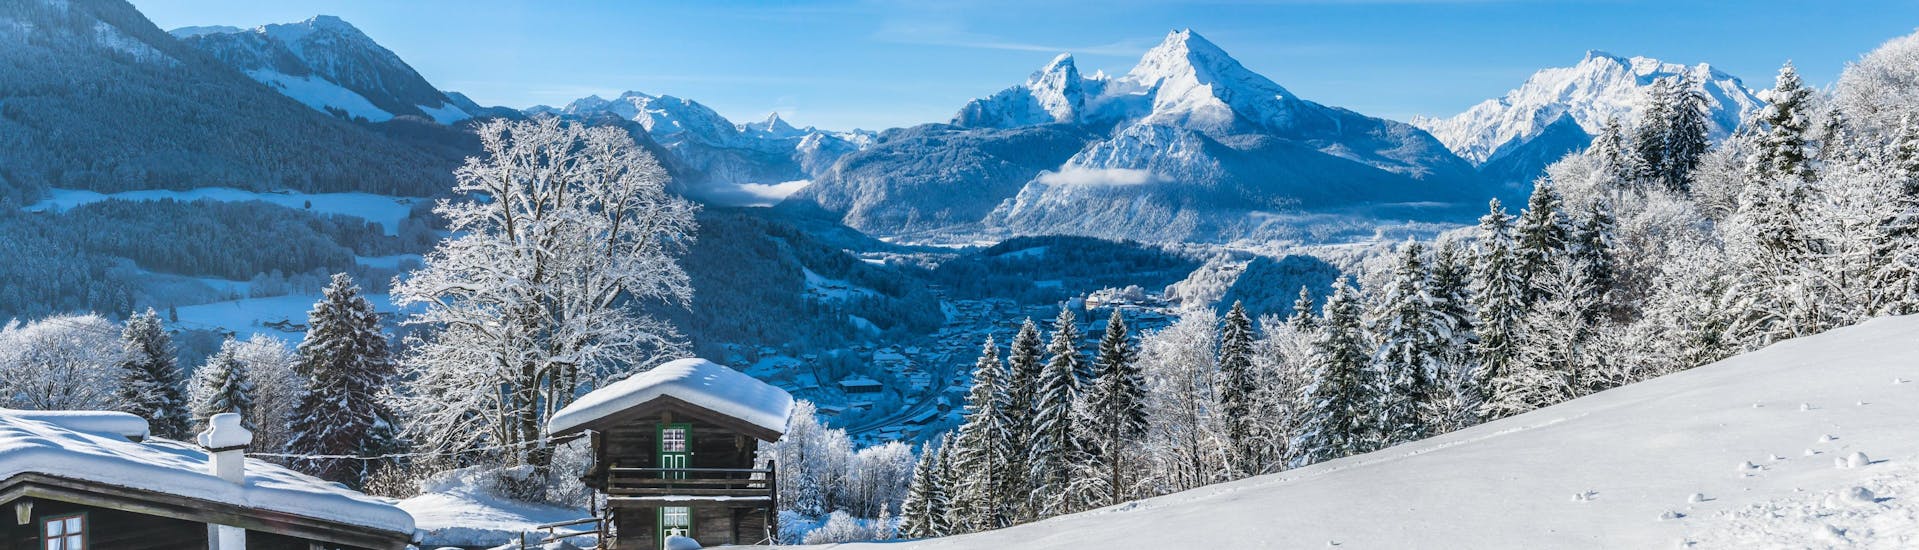 A view of the dreamly winter landscape of Berchtesgadener Land, a popular region in Germany where visitors can books ski lessons with one of the local ski schools.